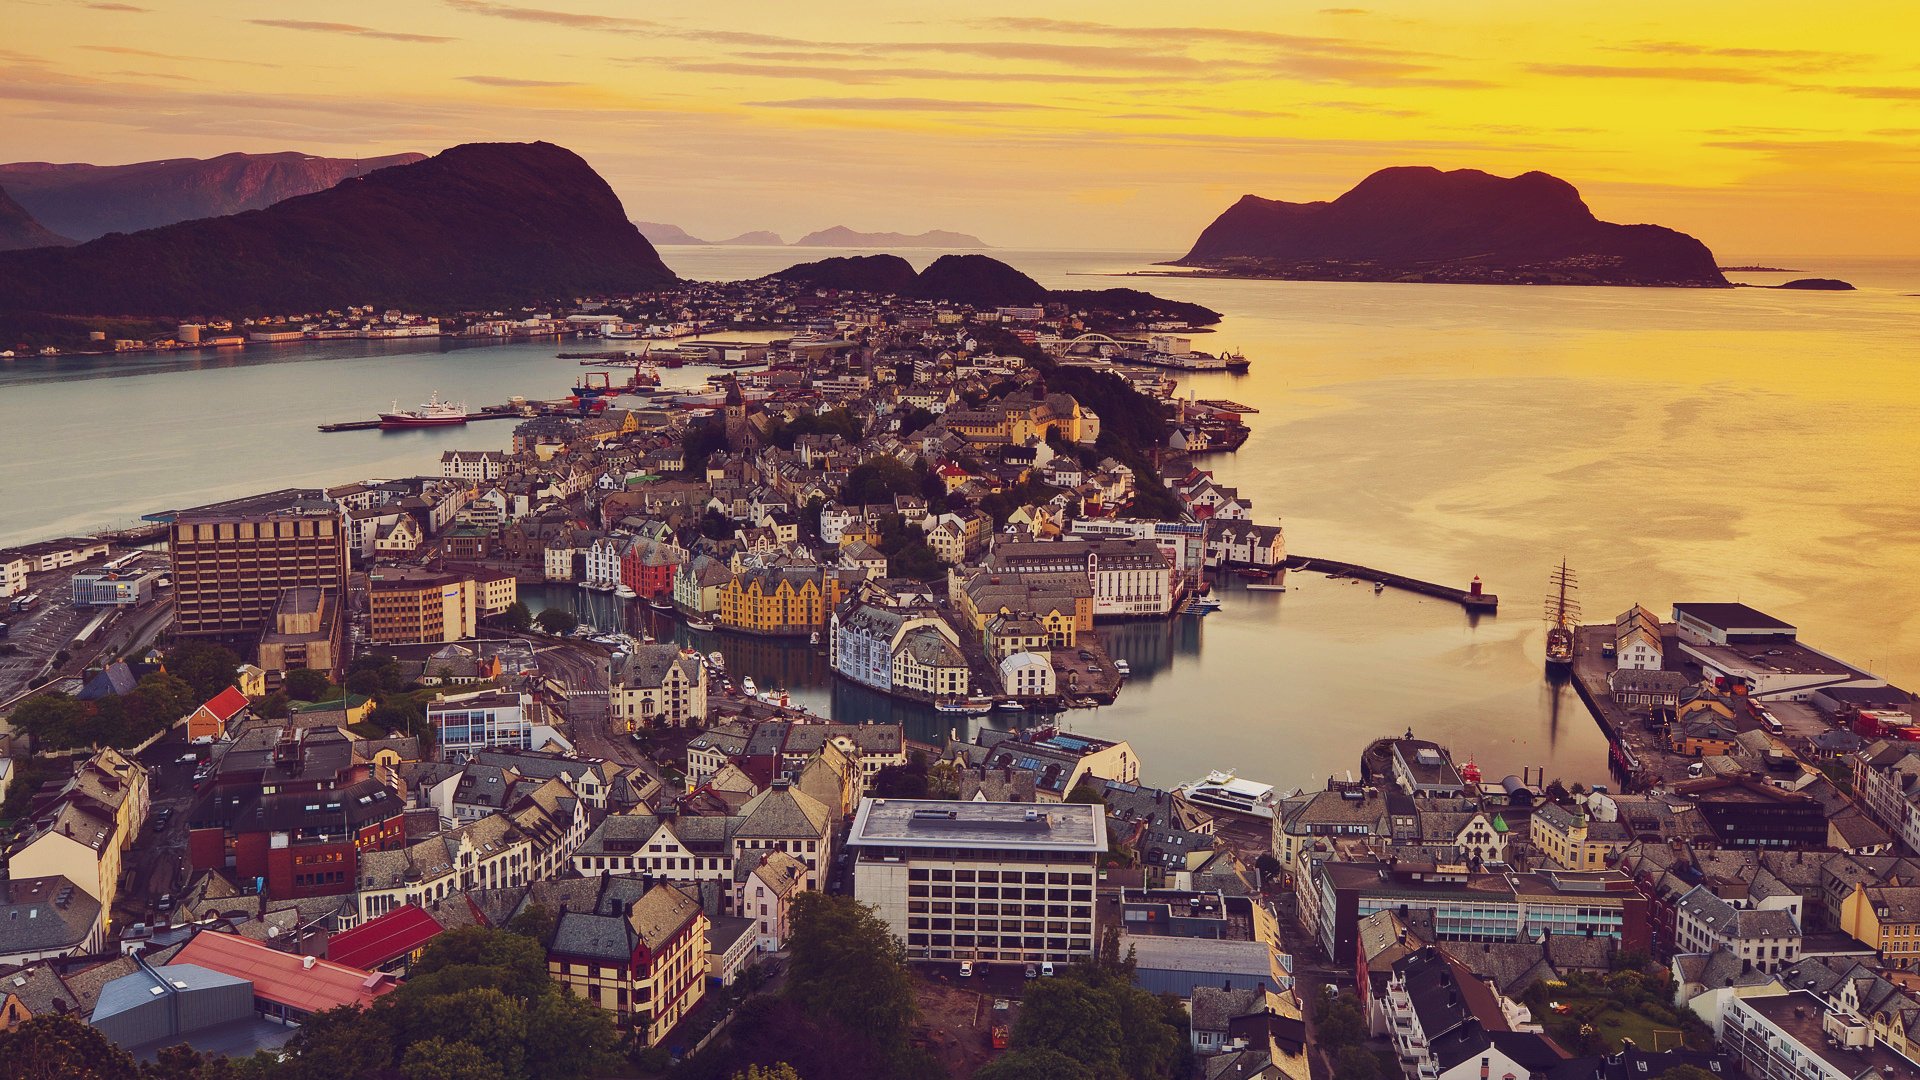 A gorgeous view of a Norwegian town on the seashore